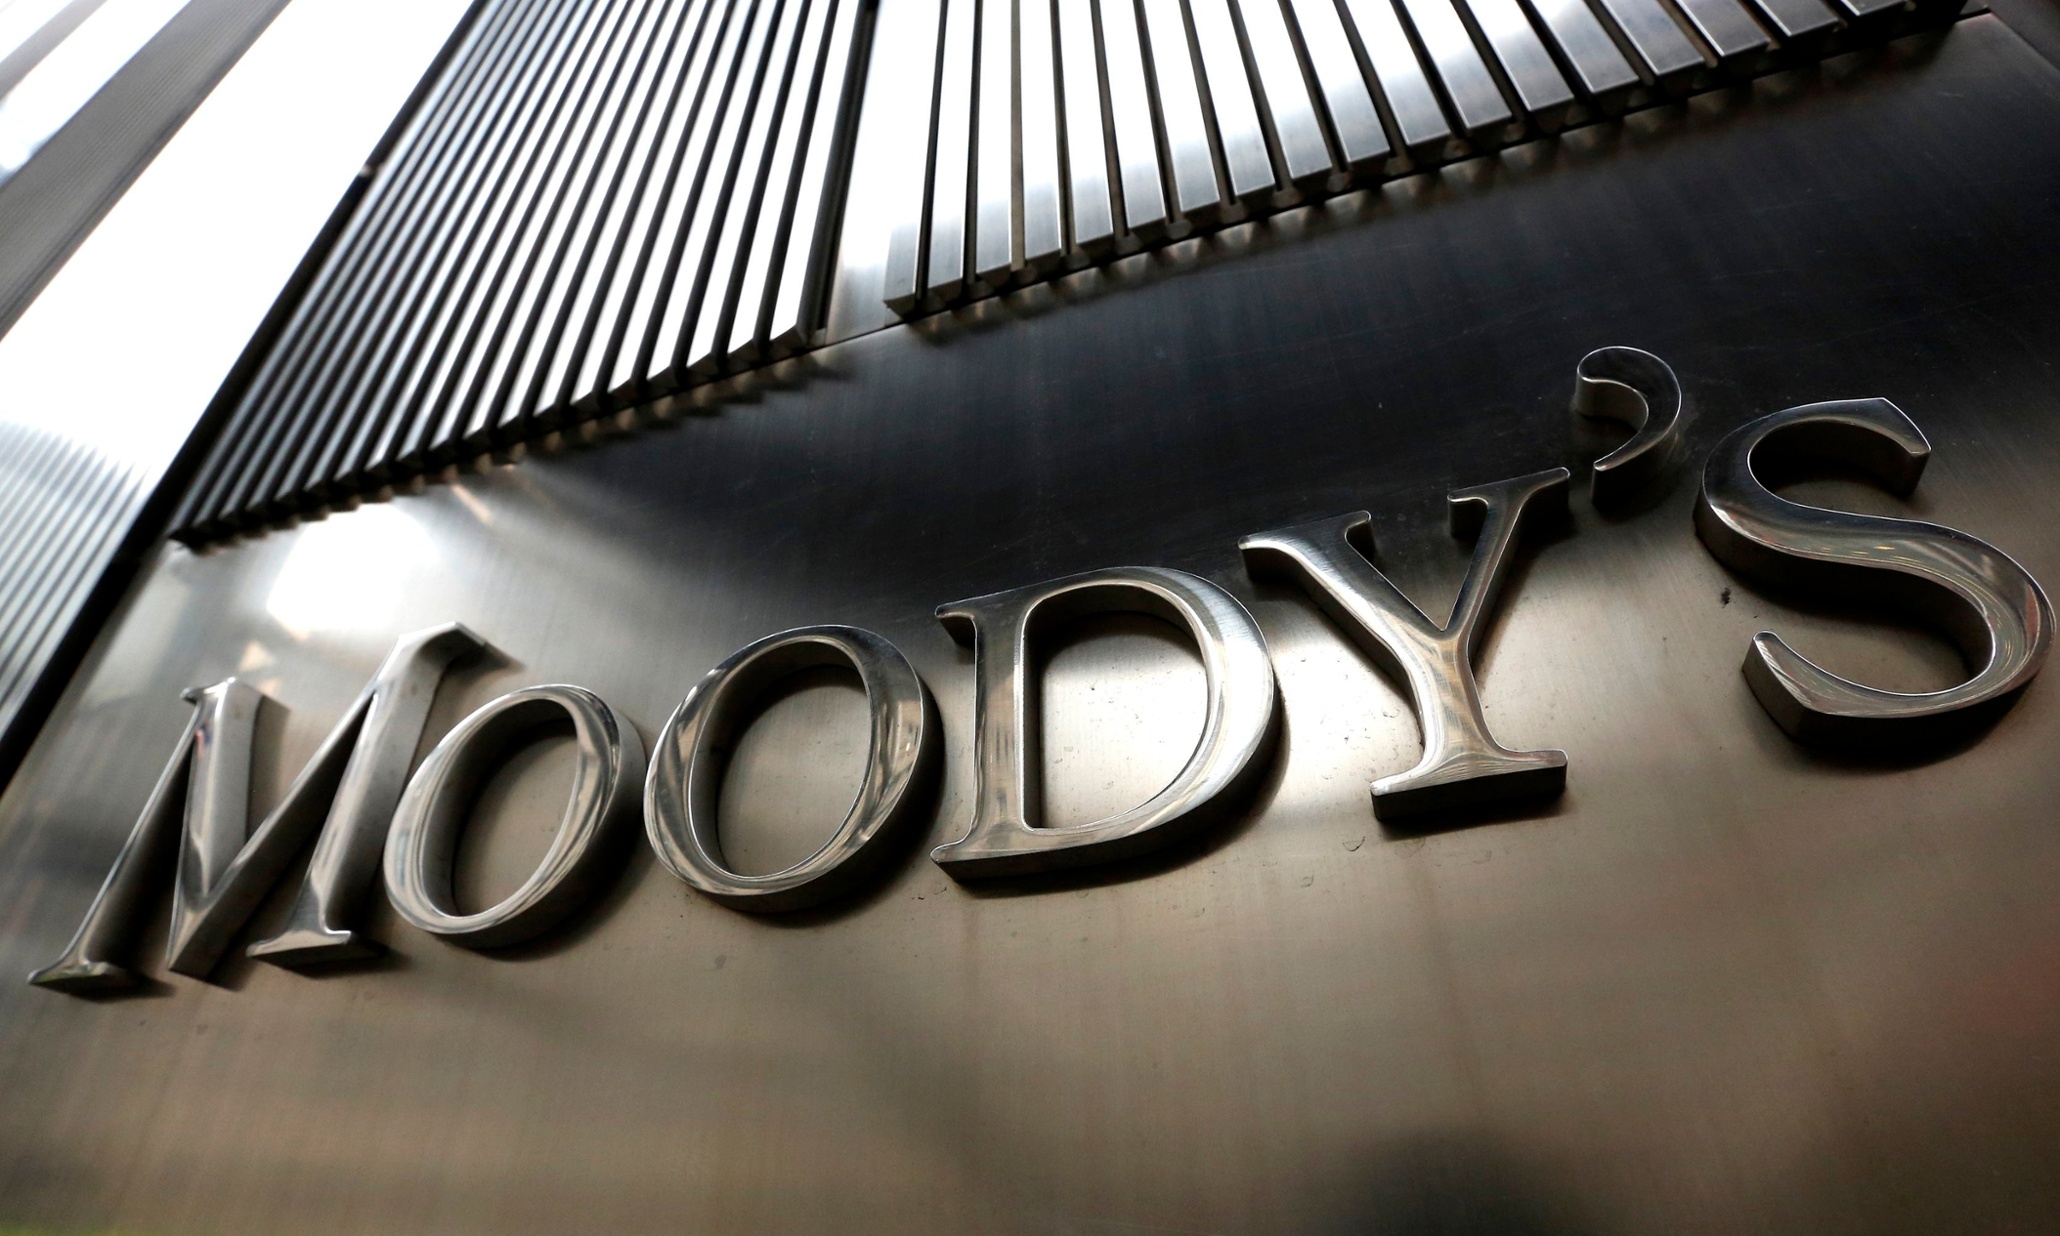 Local Opinion: Moody’s Keeps Hungarian Credit Rating Unchanged